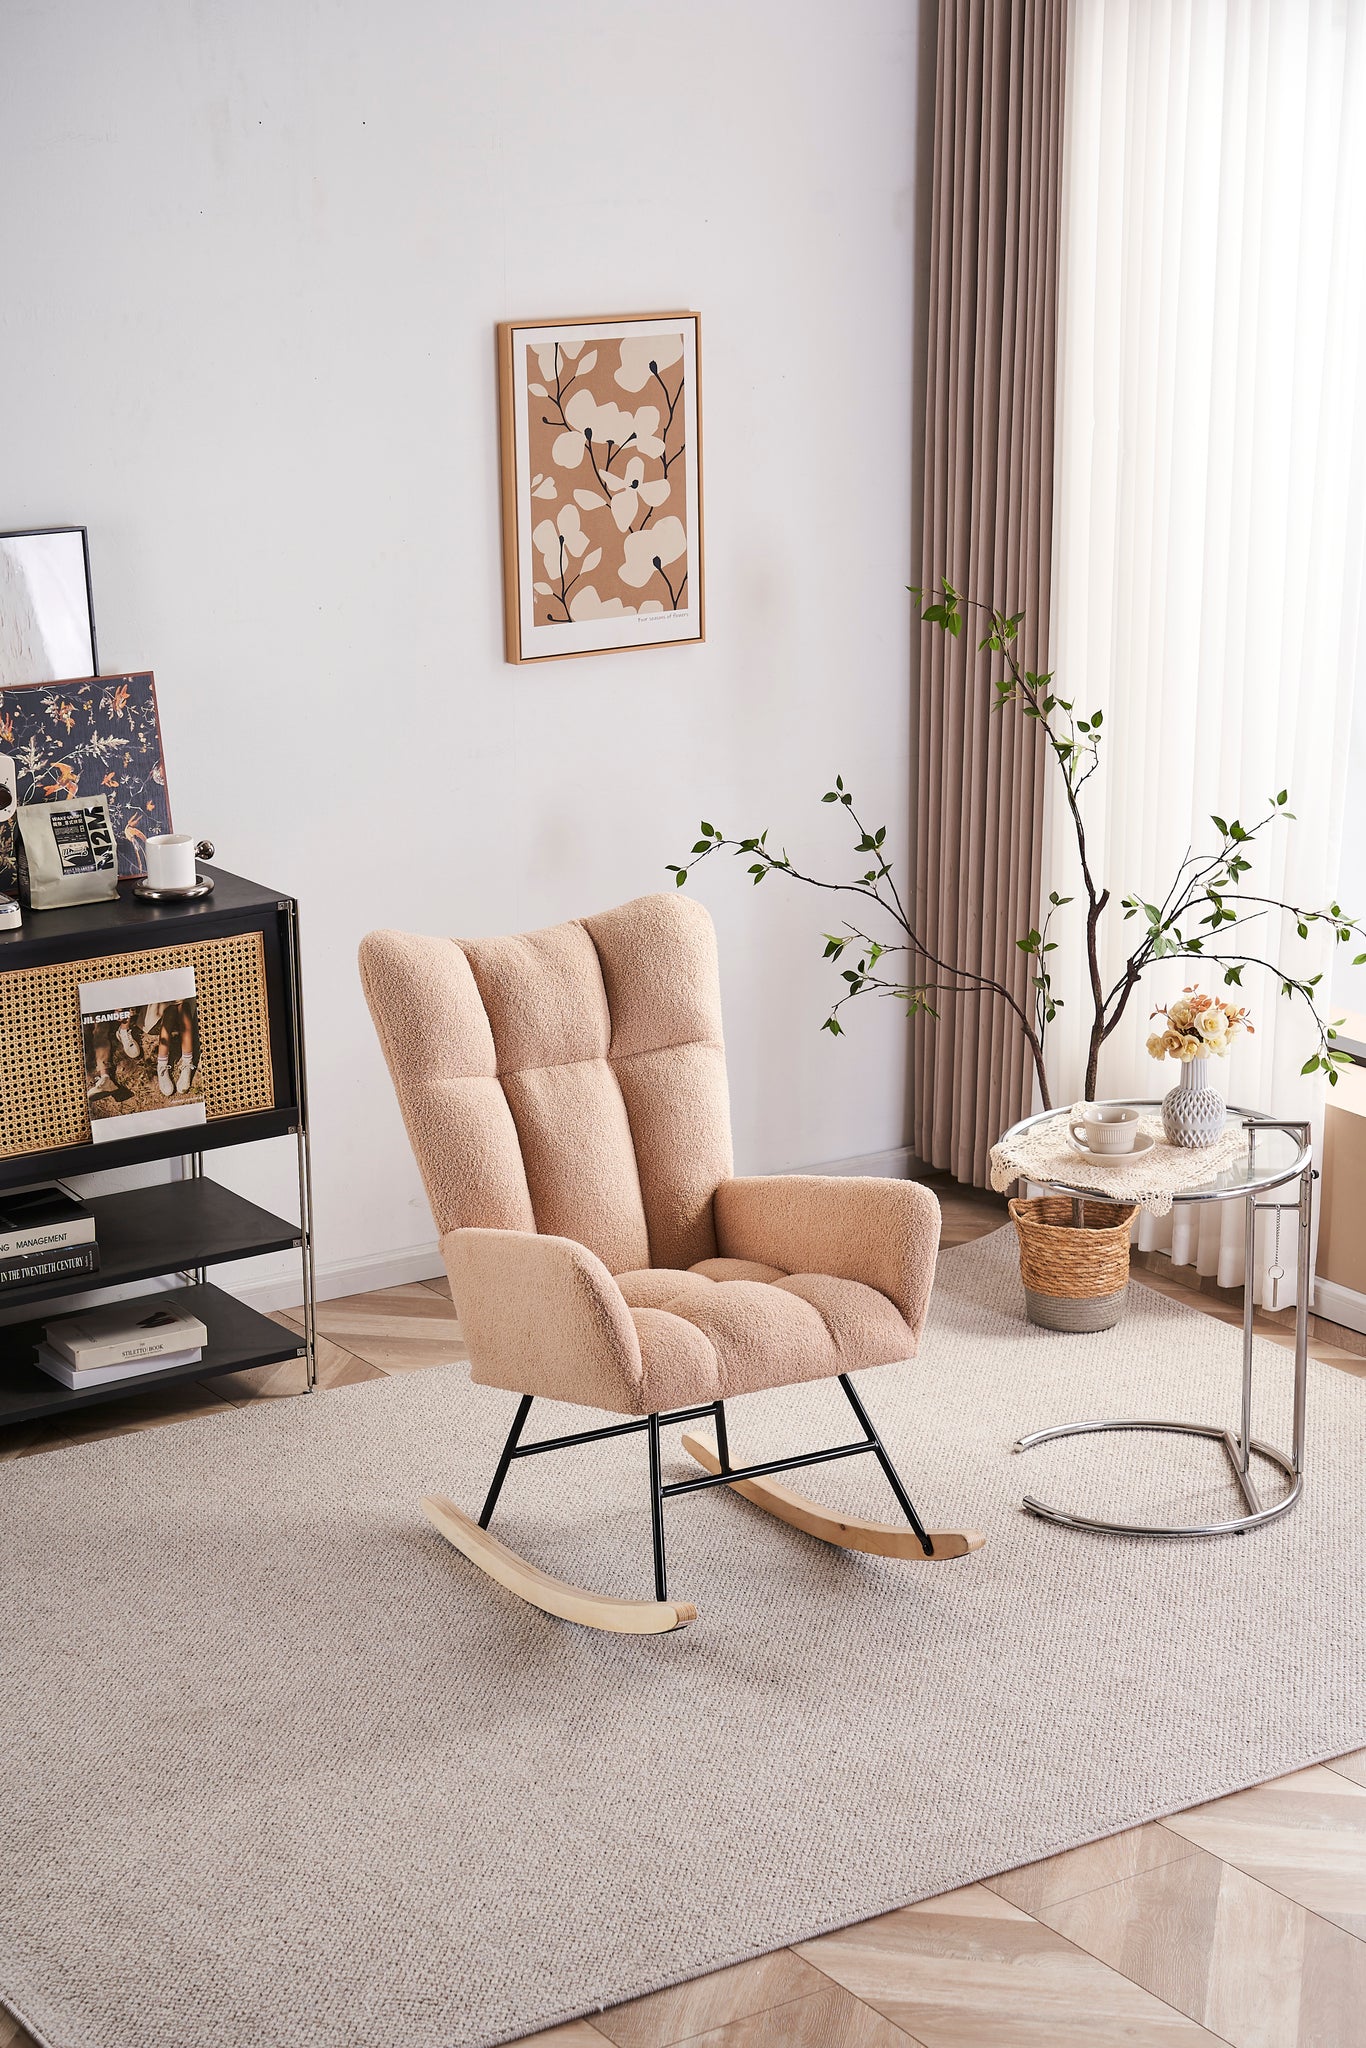 Rocking Chair Nursery, Solid Wood Legs Reading Chair cream-primary living space-modern-rocking